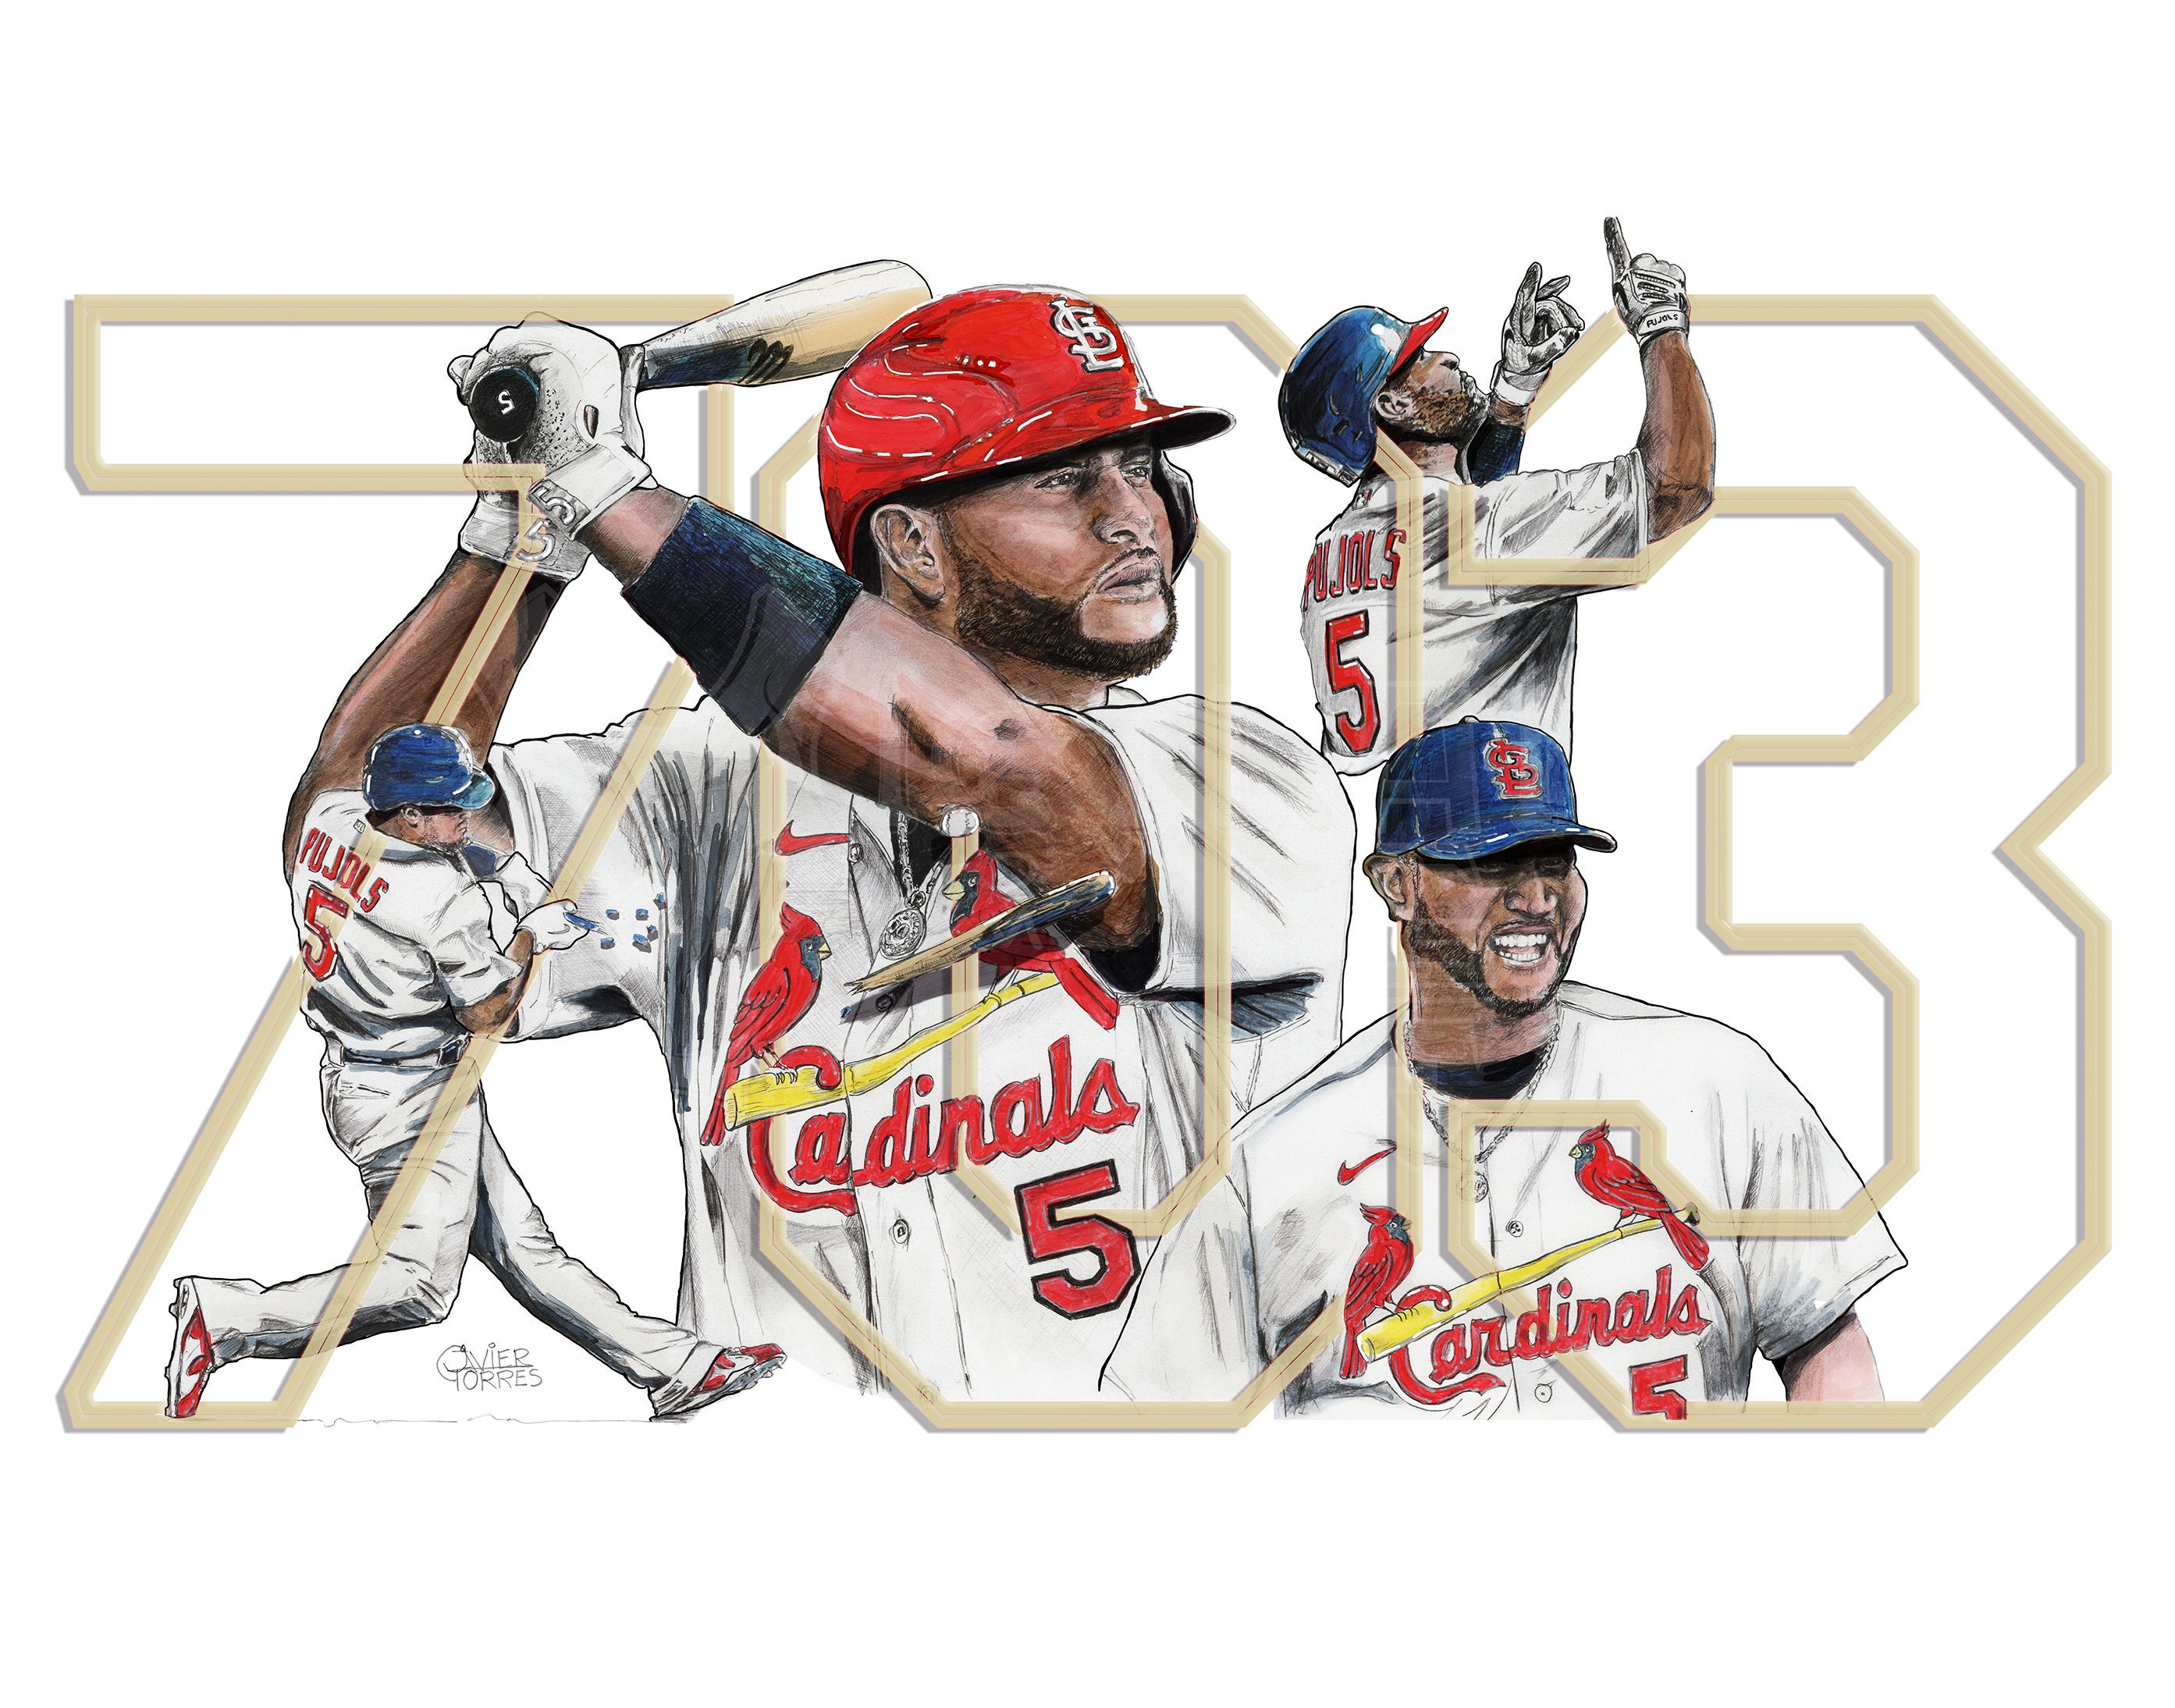  LISHINE Super Athlete Albert Pujols Poster Decorative Painting  Canvas Wall Art Living Room Posters Bedroom Painting Unframe-Style  24x36inch(60x90cm): Posters & Prints